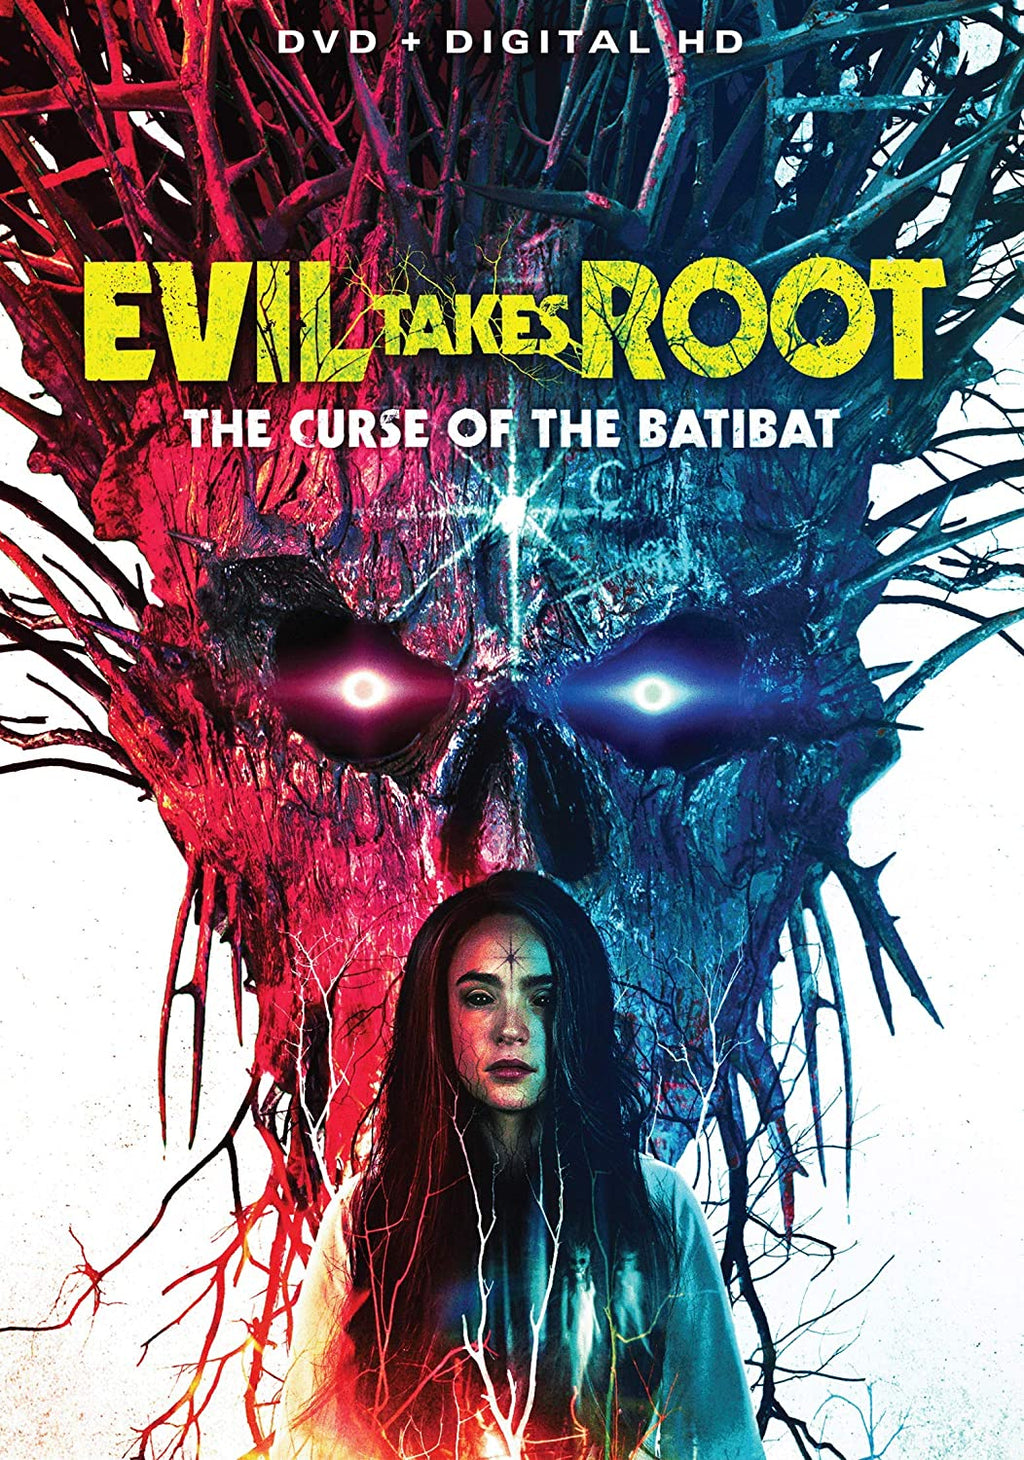 Evil Takes Root: The Curst of the Batibat DVD